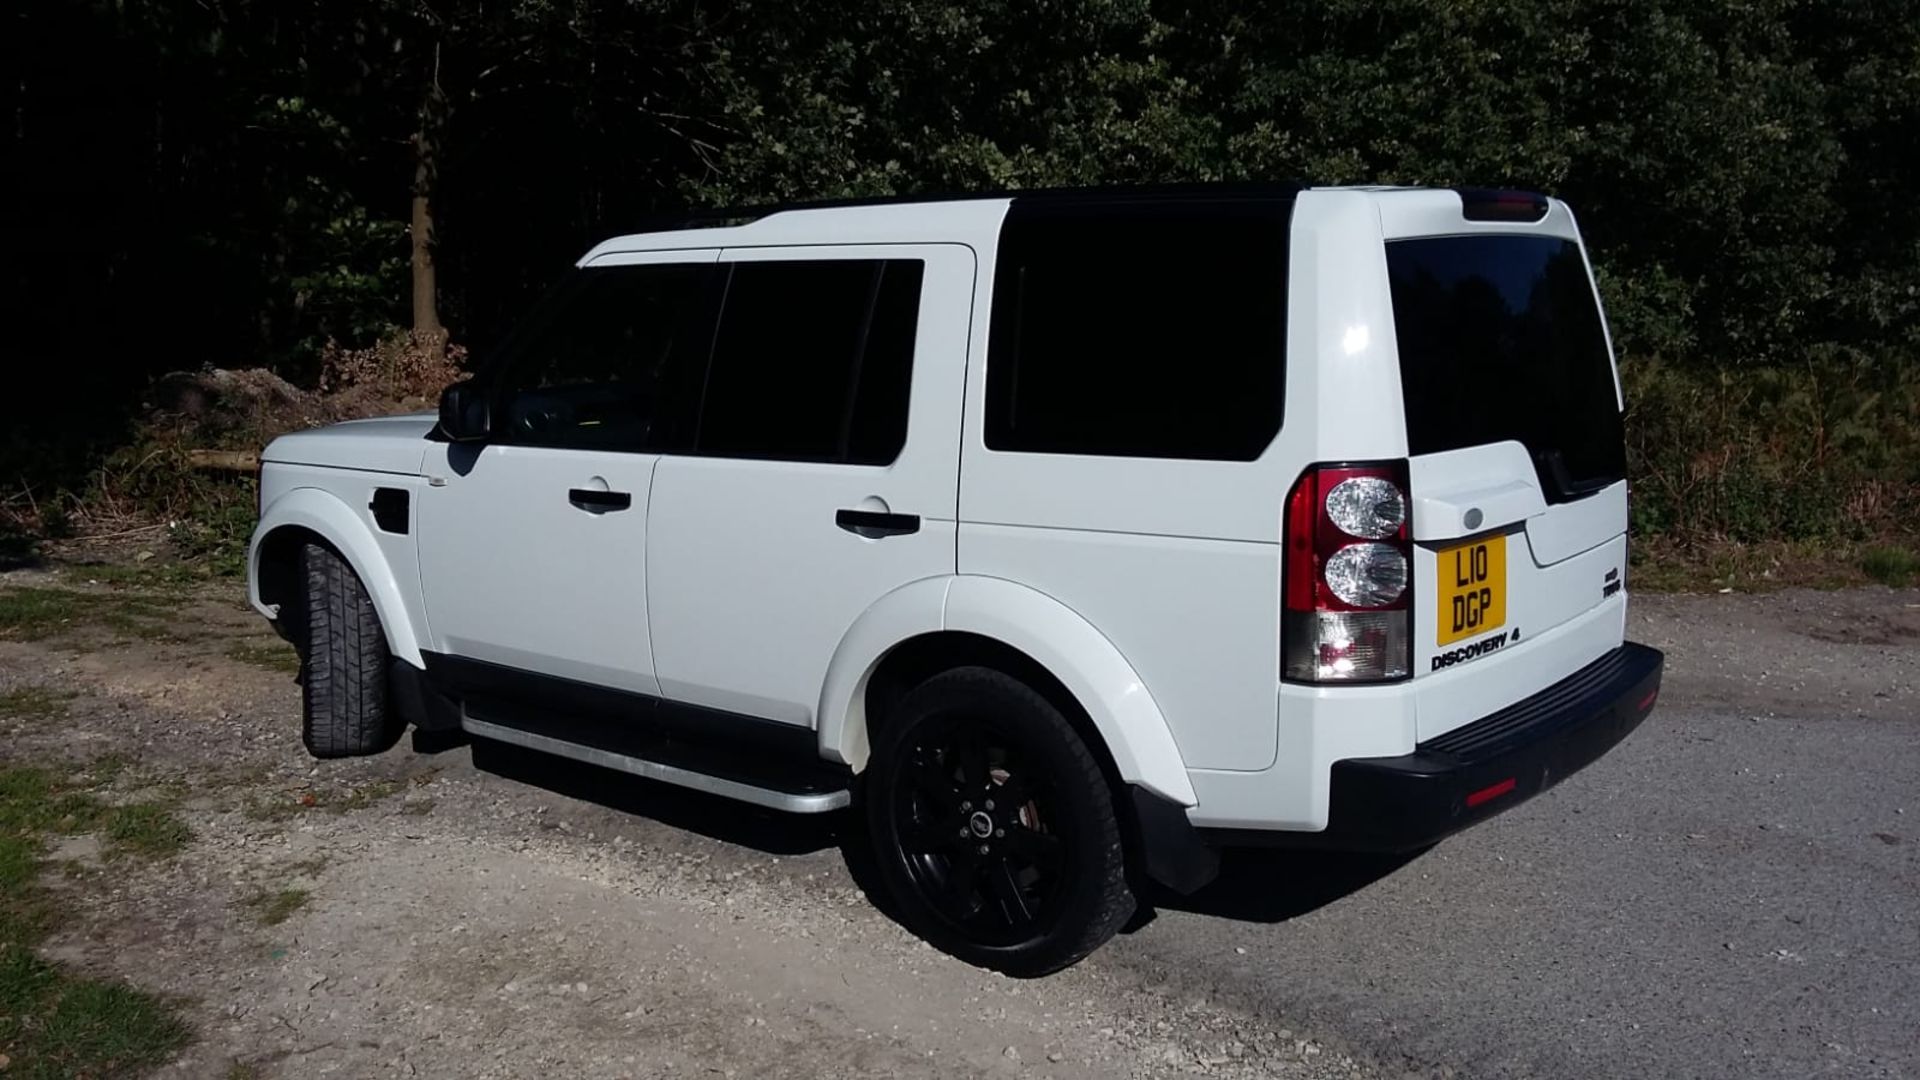 2011/60 REG LAND ROVER DISCOVERY TDV6 AUTOMATIC WHITE DIESEL LIGHT 4X4 *NO VAT* - Image 4 of 11